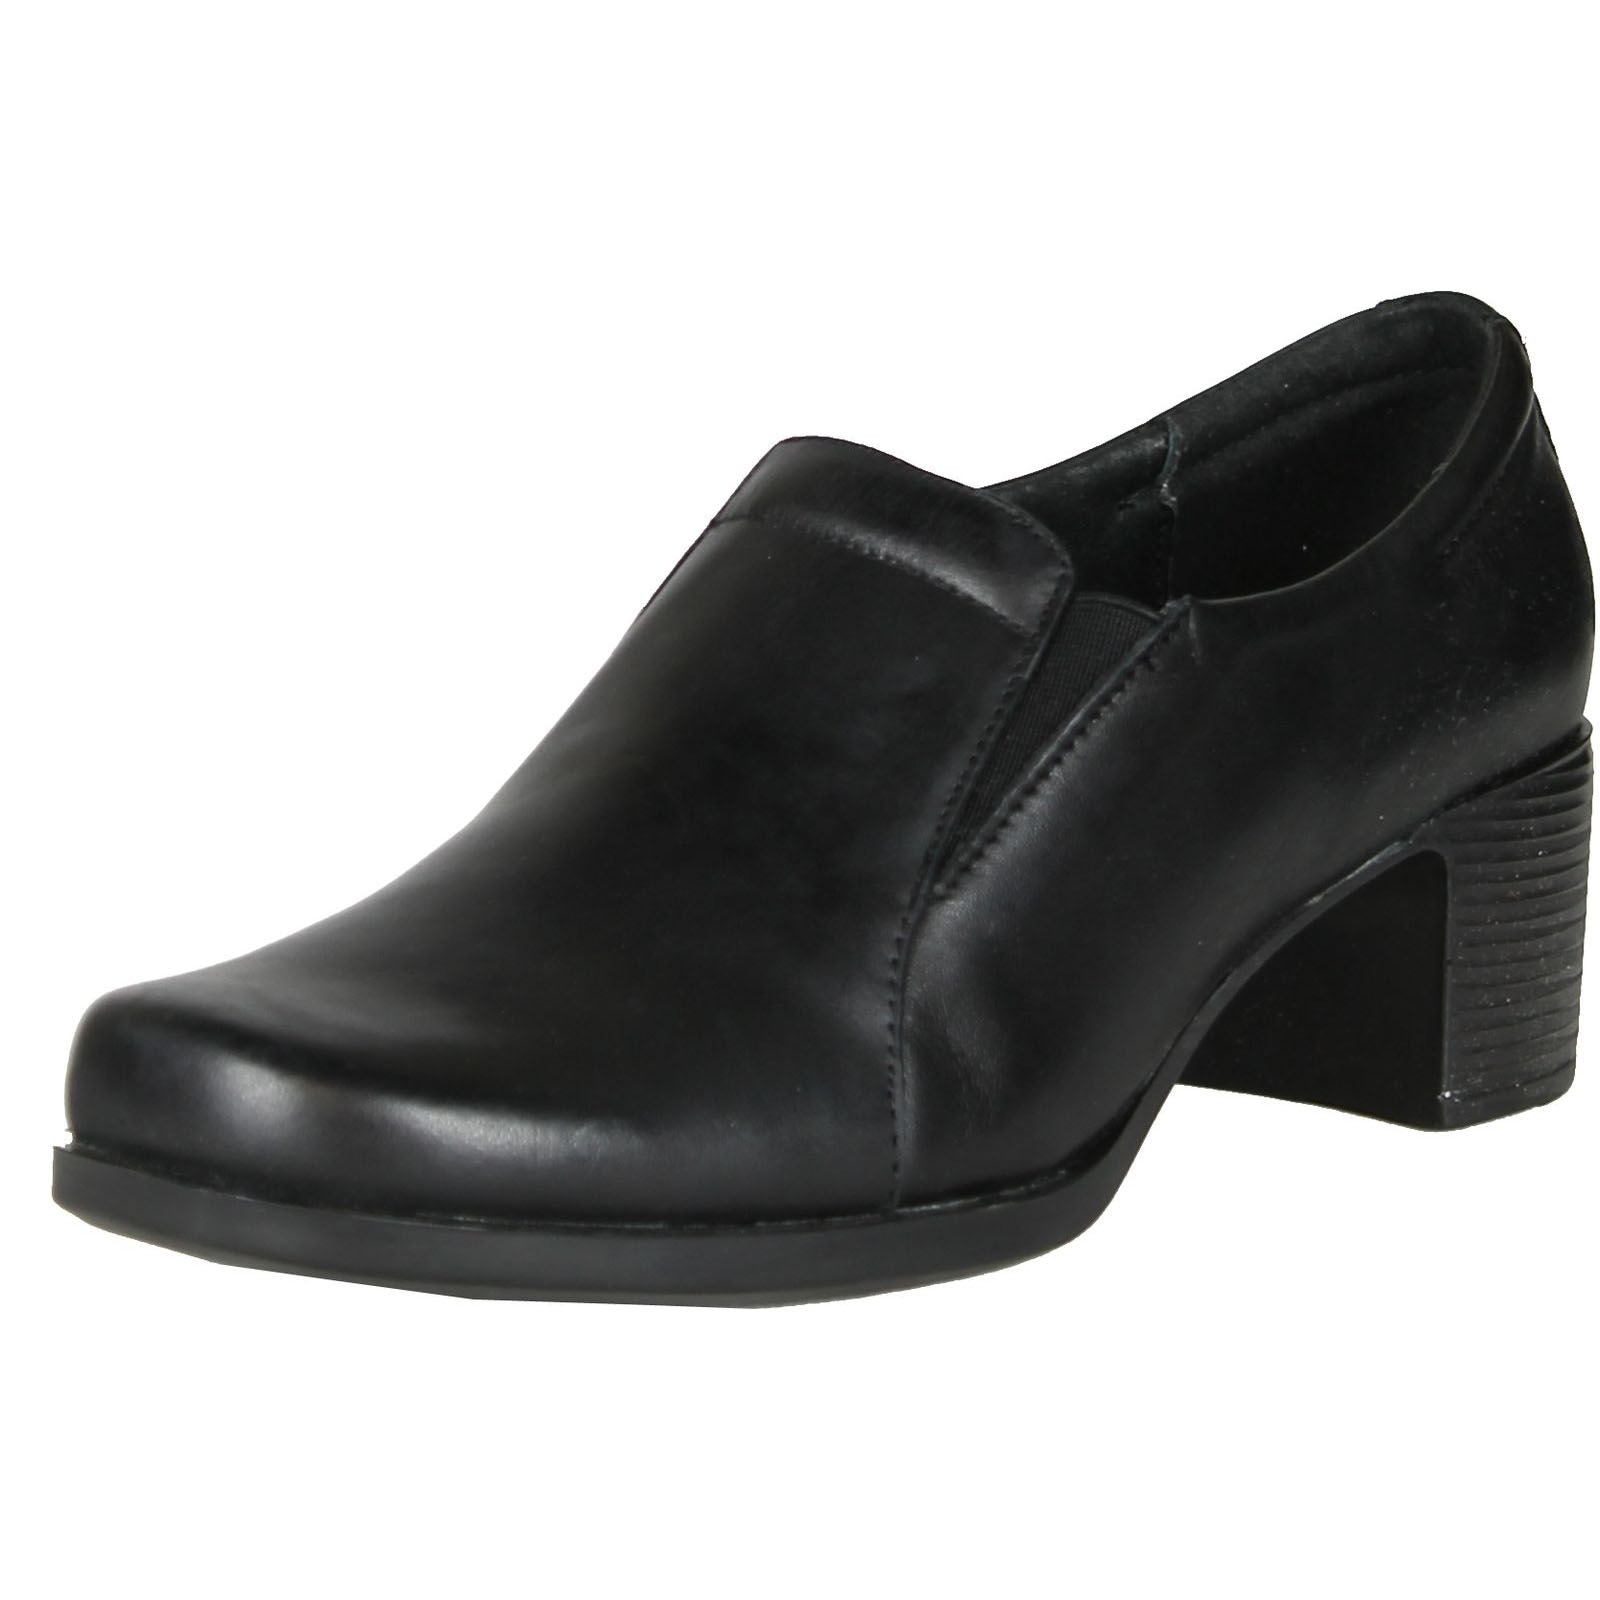 Step Womens Lydianna Casual Pumps Shoes - Black. - 35 M EU / 5 B(M) US - Overstock - 14384256